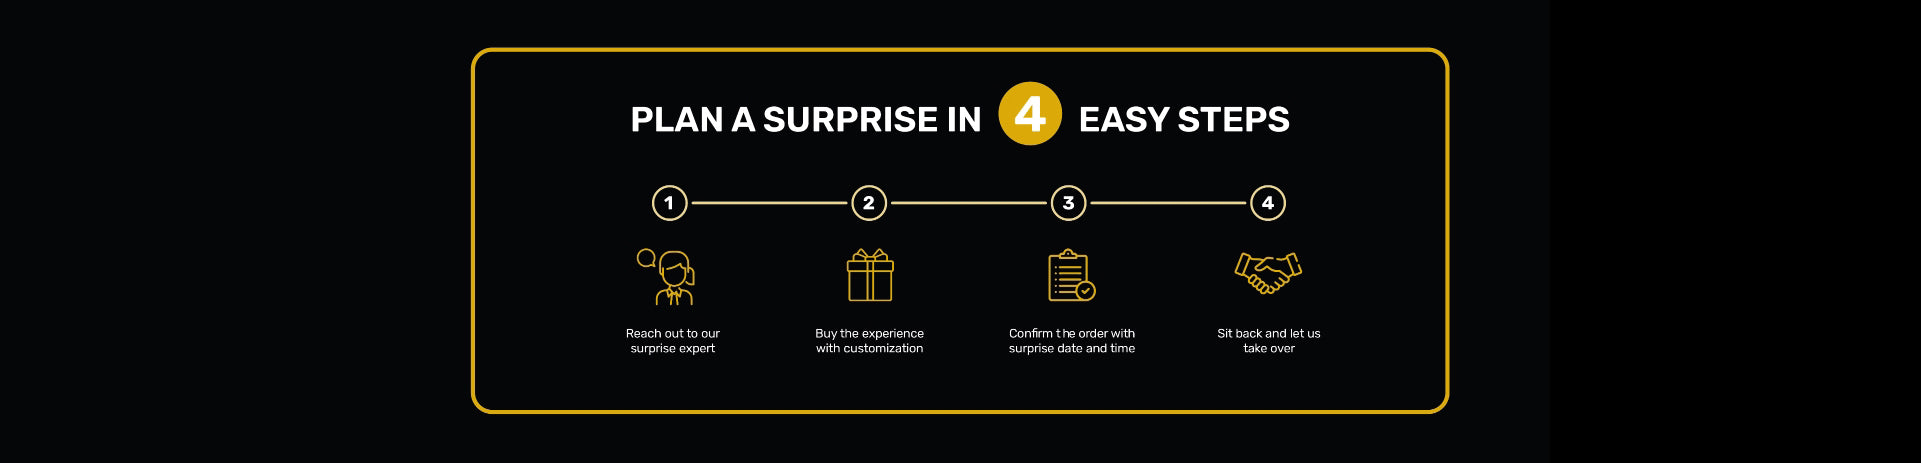 Plan a surprise in 4 easy steps